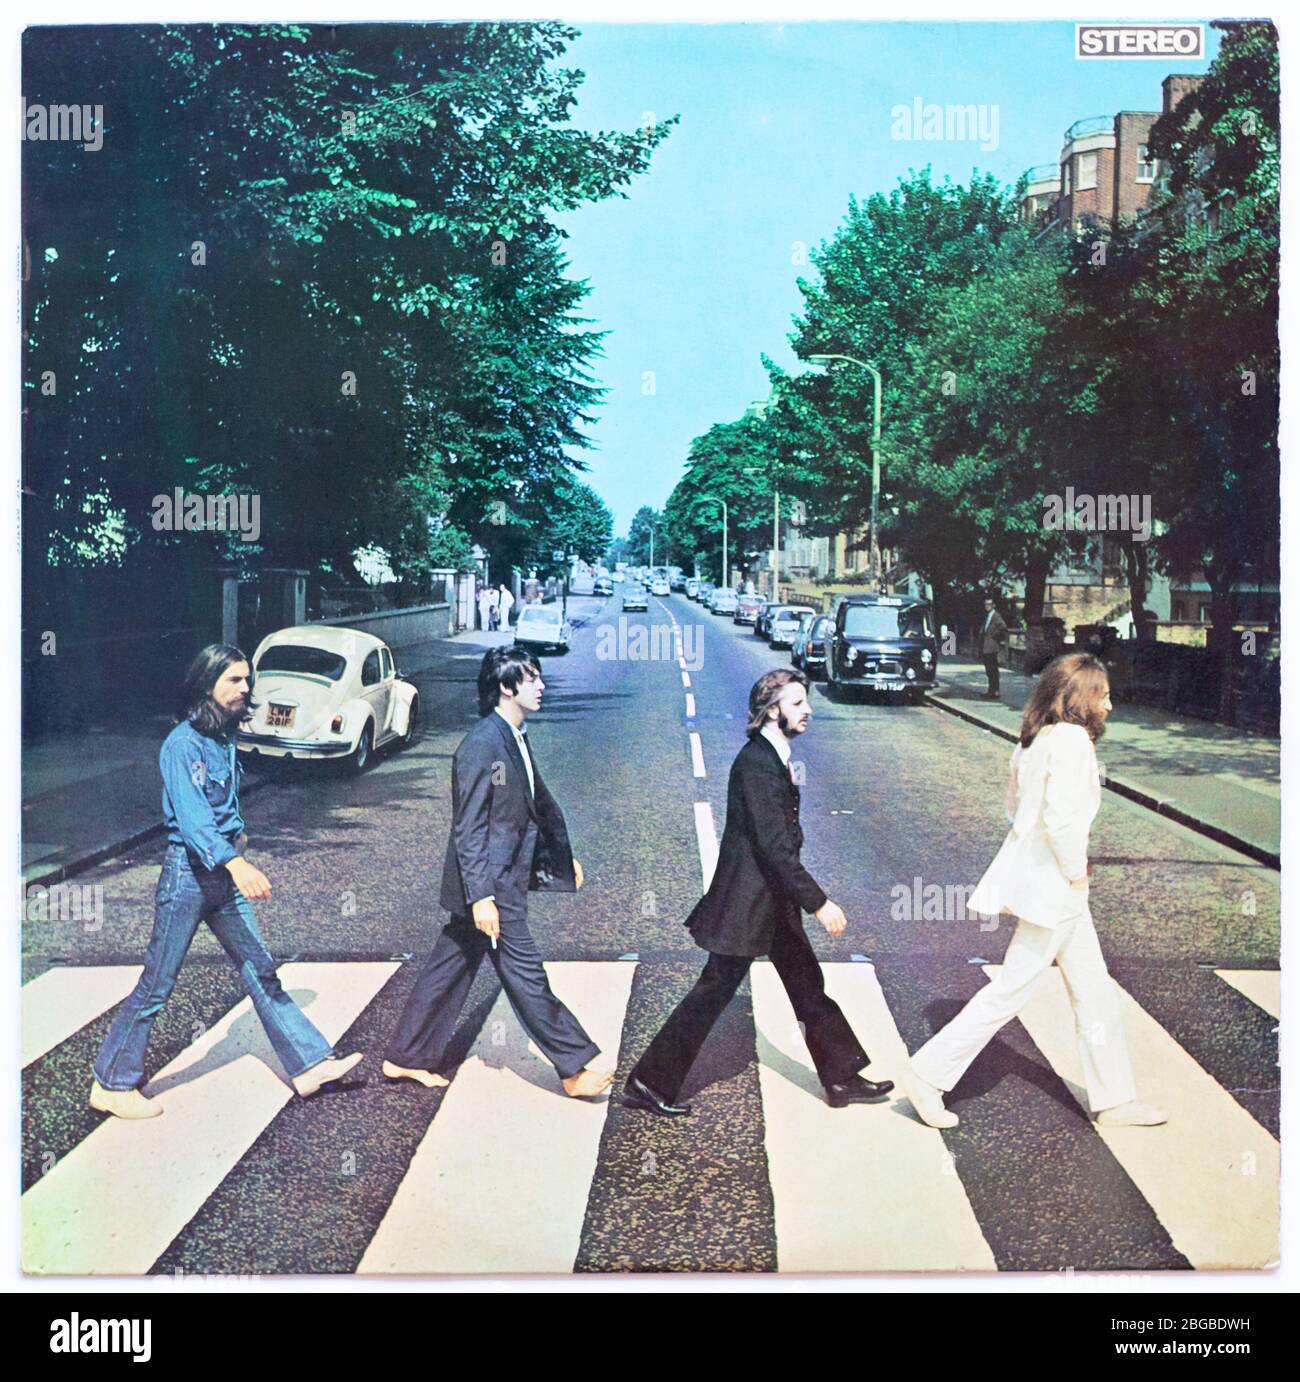 The cover of Abbey Road, 1969 album by The Beatles on Apple - Editorial use only Stock Photo